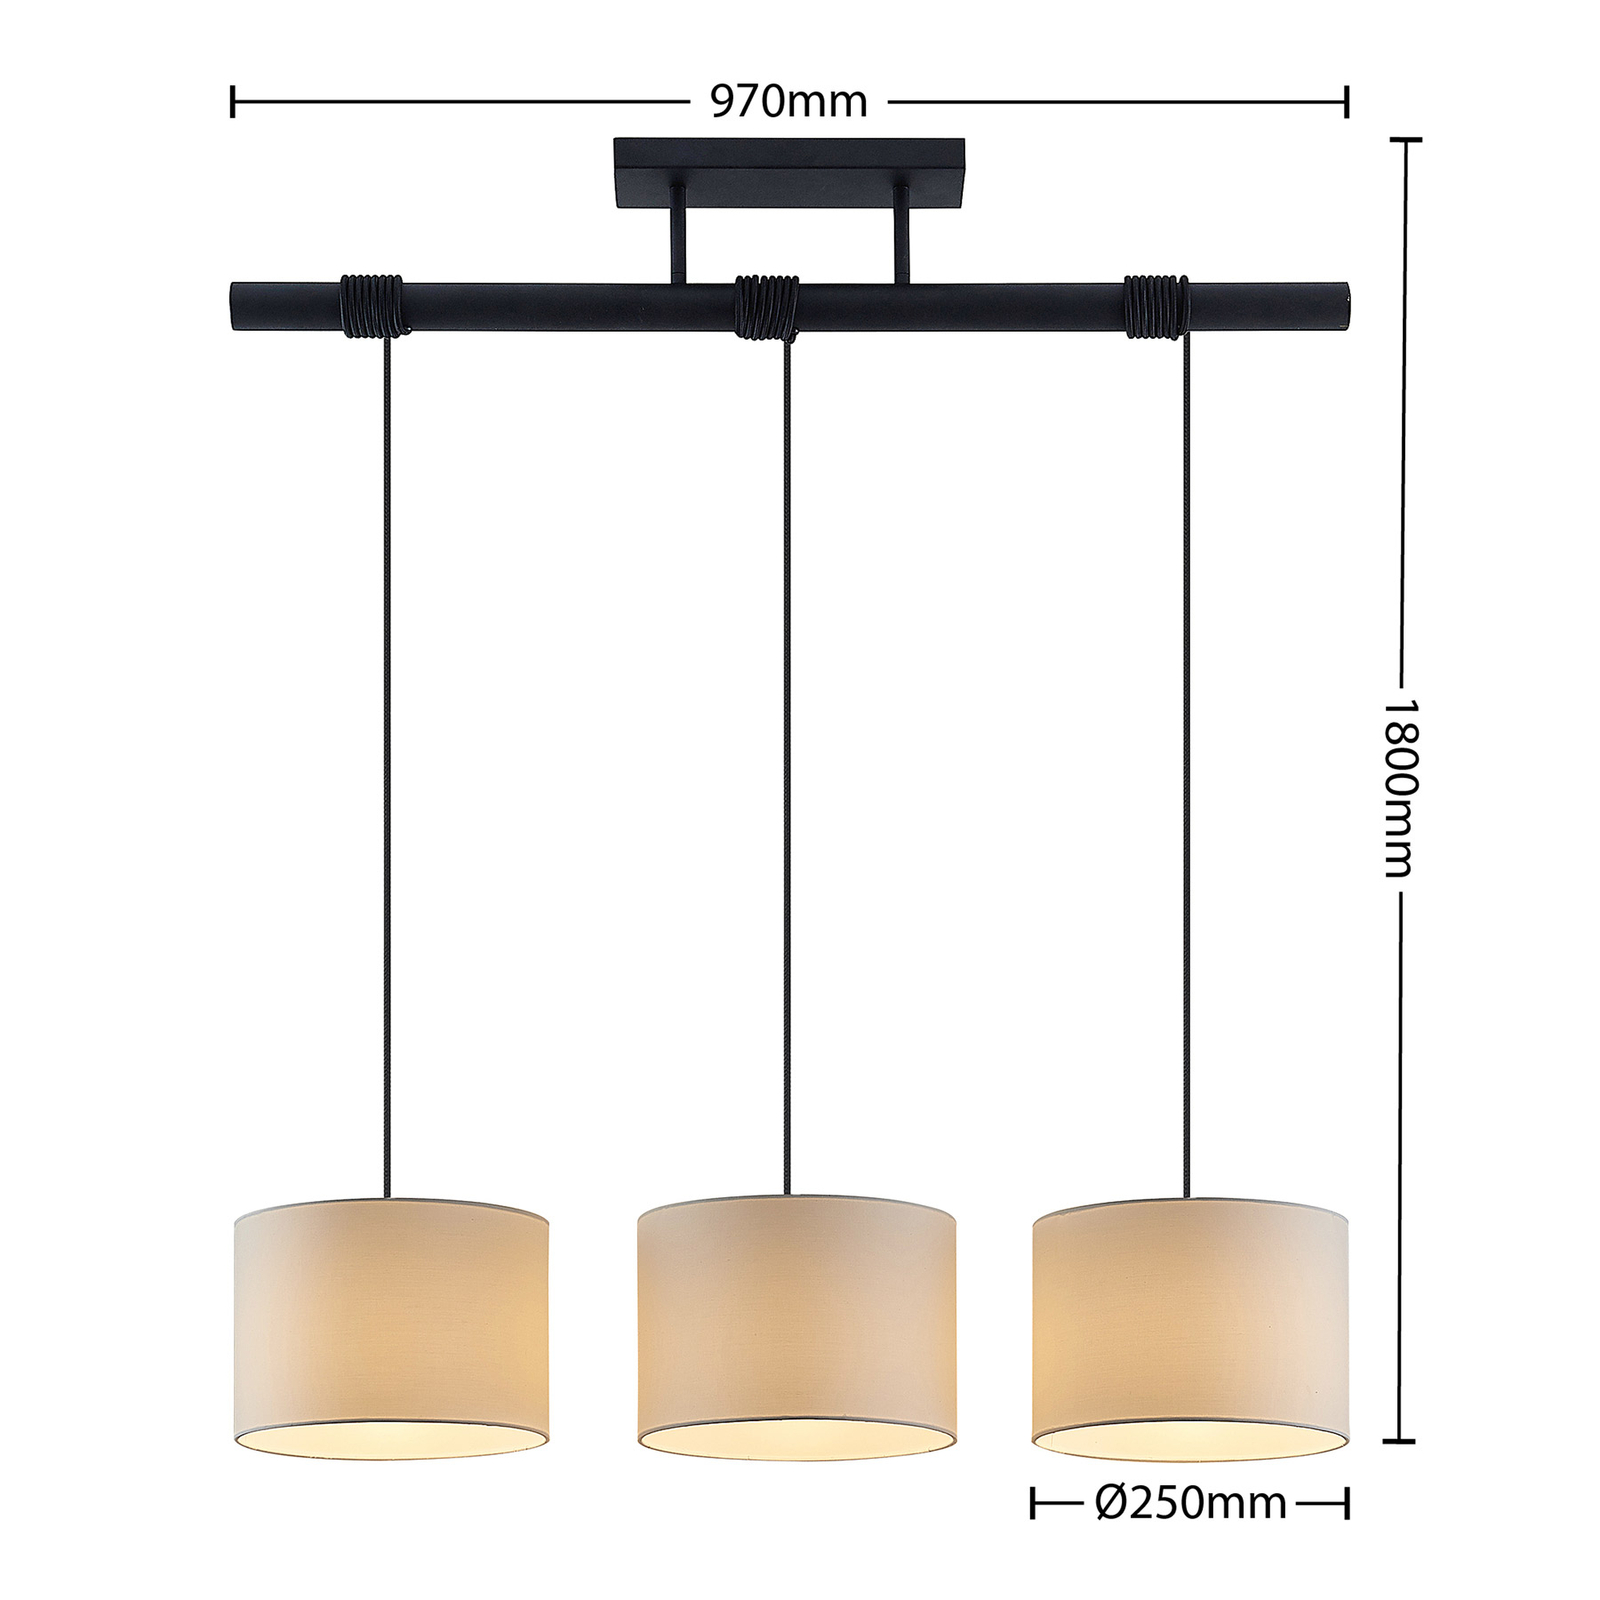 Wolkenkrabber Westers cafe Lindby Meeno stof-hanglamp, wit, 3-lamps | Lampen24.nl